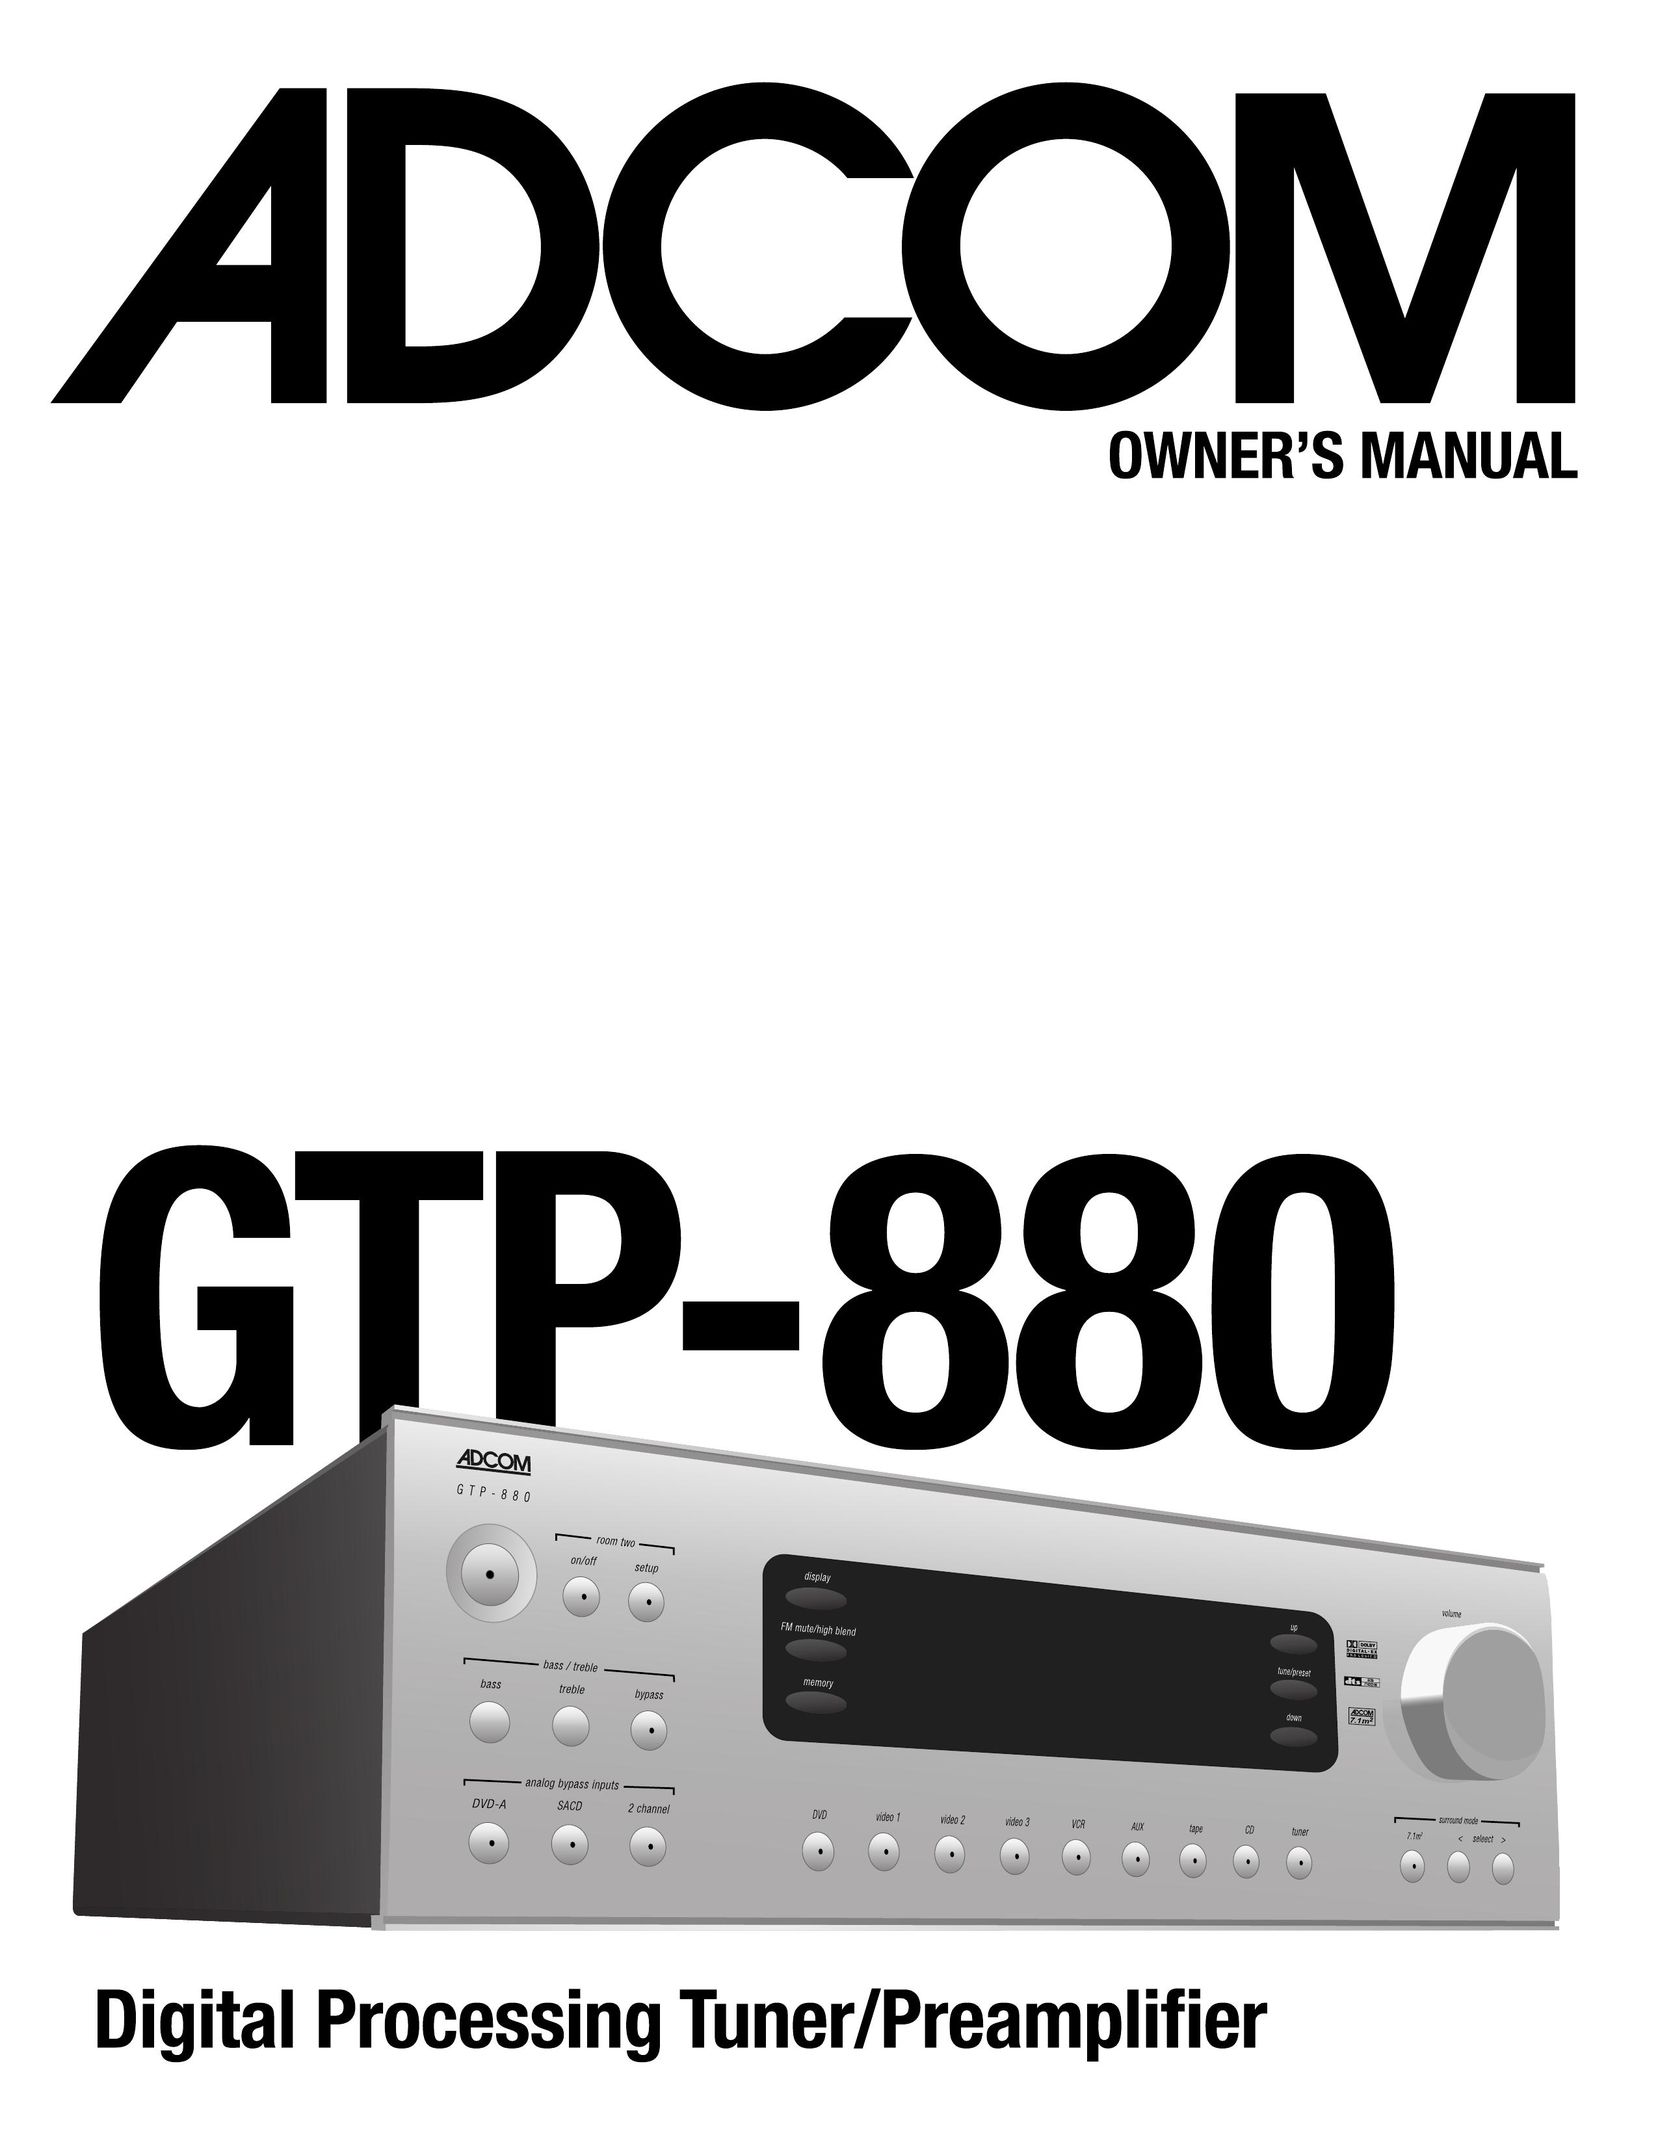 Adcom GTP-880 Home Theater System User Manual